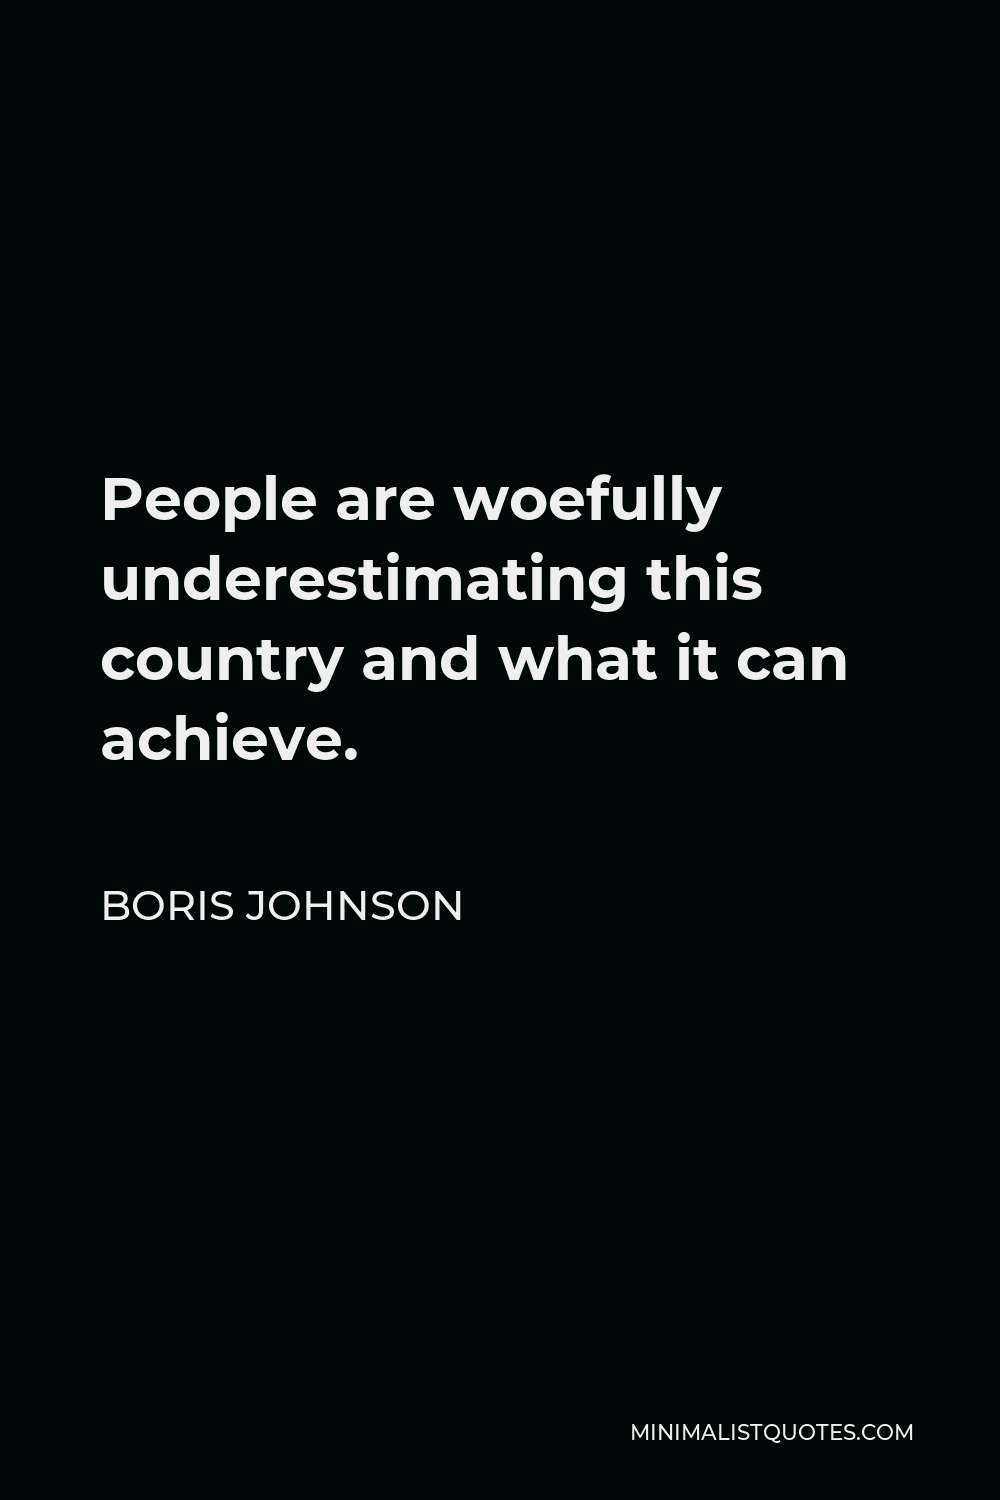 Boris Johnson Quote - People are woefully underestimating this country and what it can achieve.